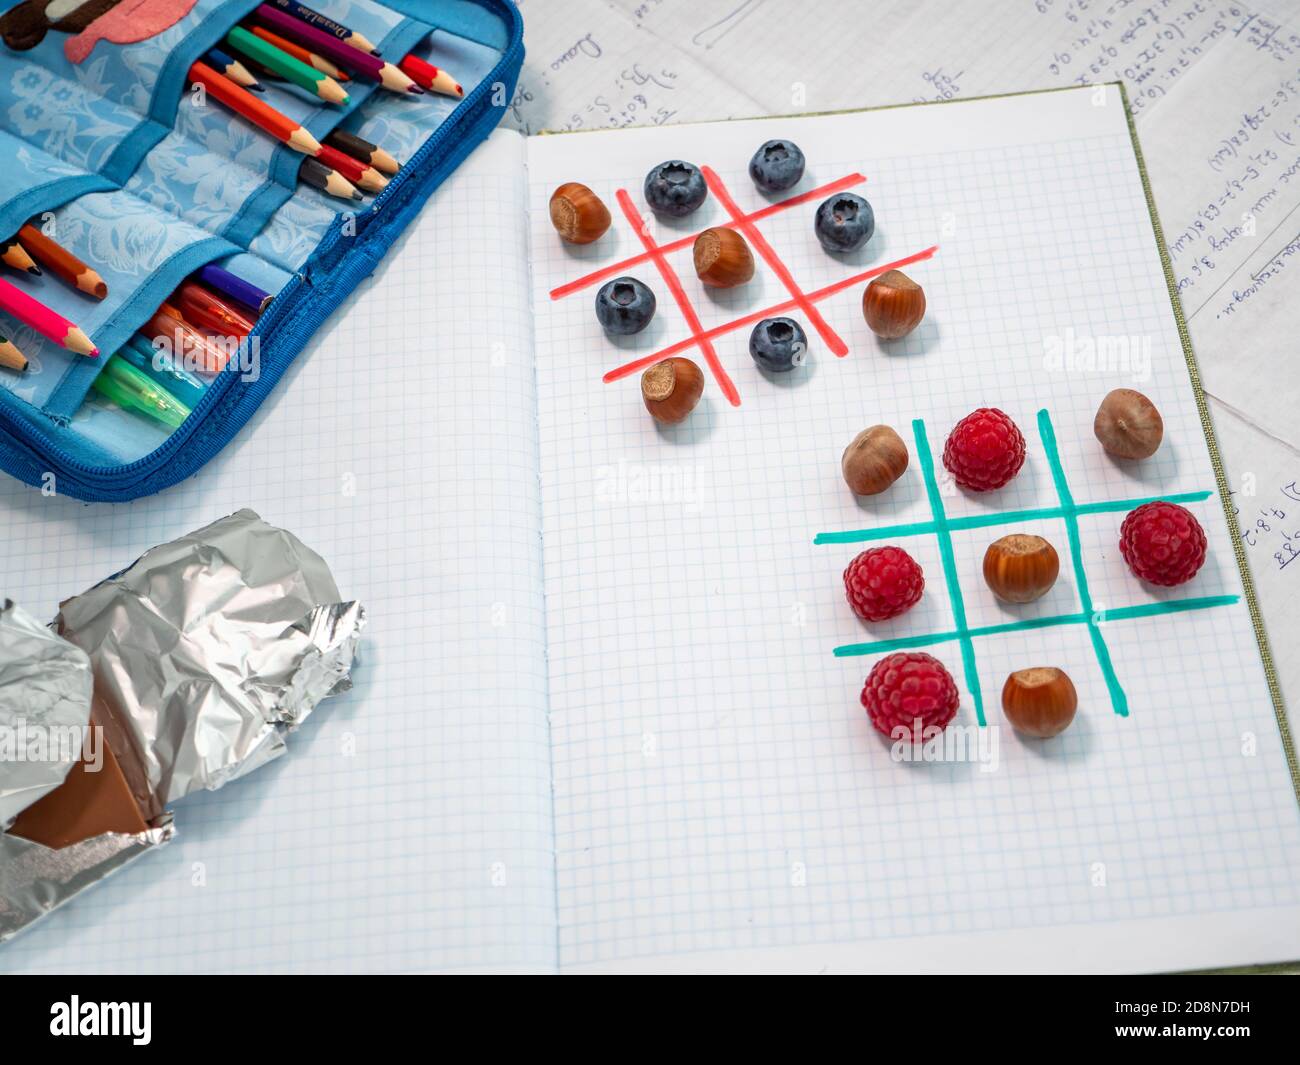 Tasty school break and fun games at school. Tic-tac-toe by raspberries, blueberries and hazelnuts. Pencil case with colored pencils and chocolate. Stock Photo